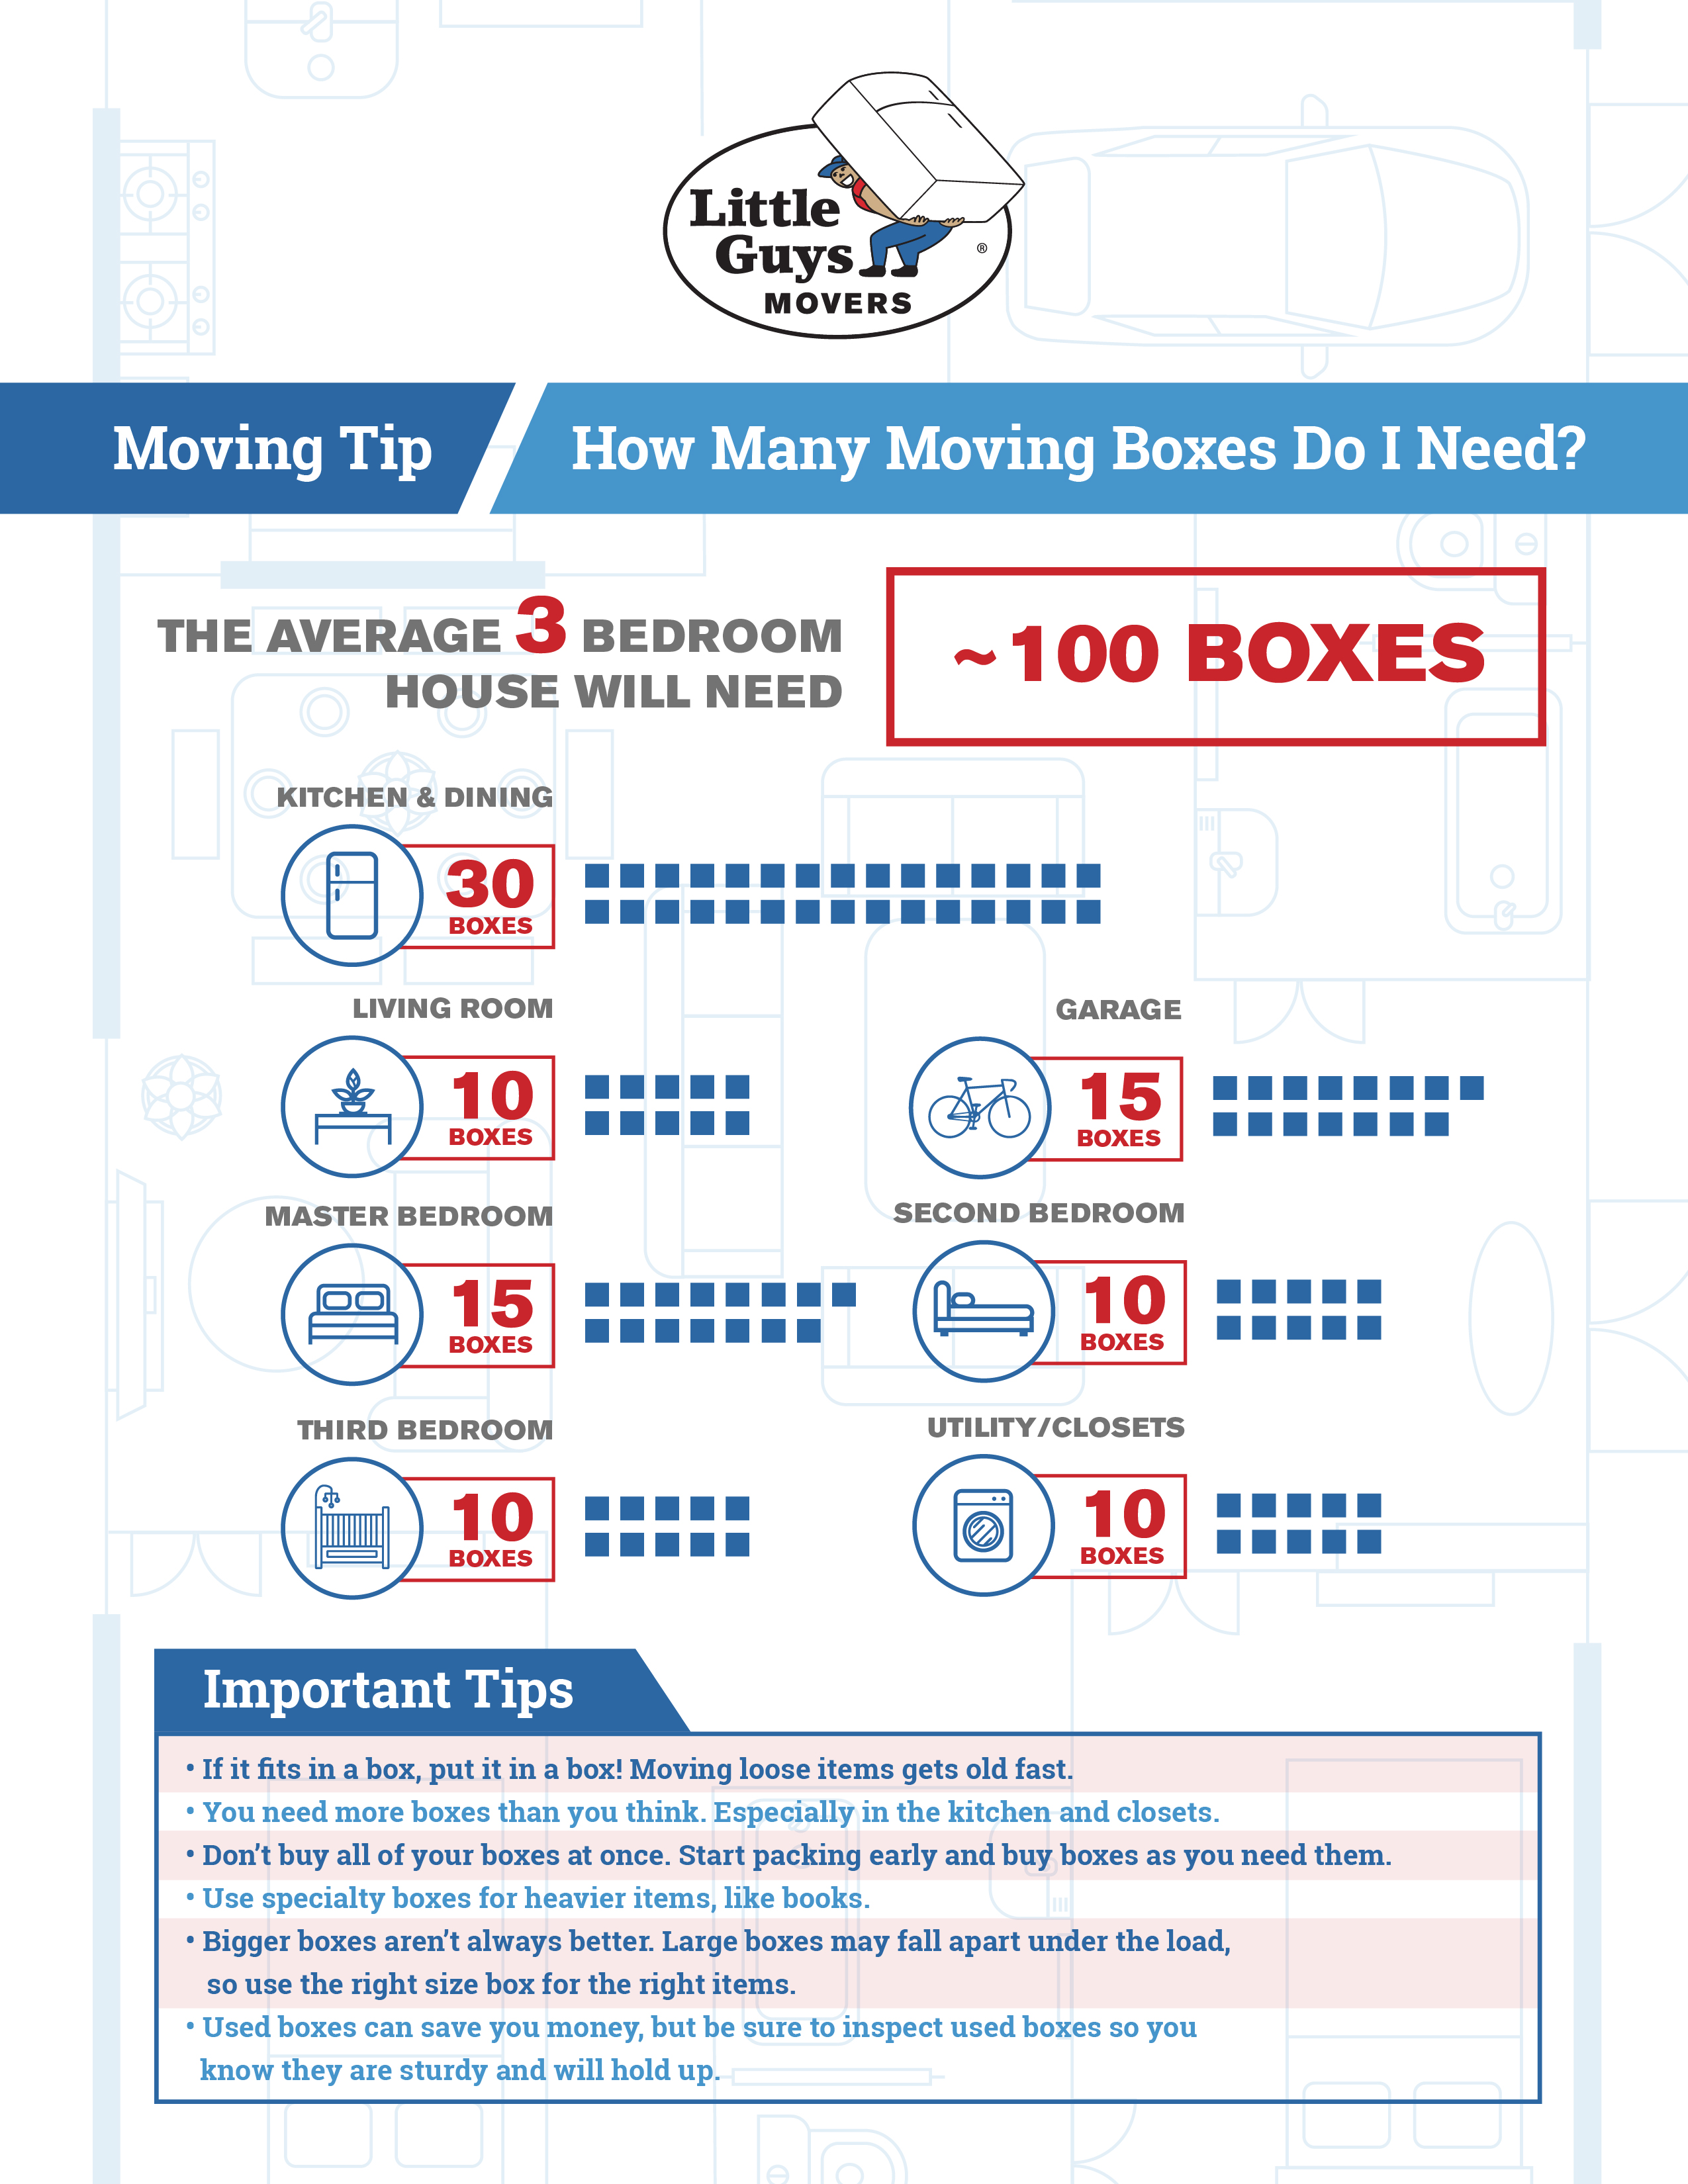 Little Guys Movers Moving Box Estimator Graphic